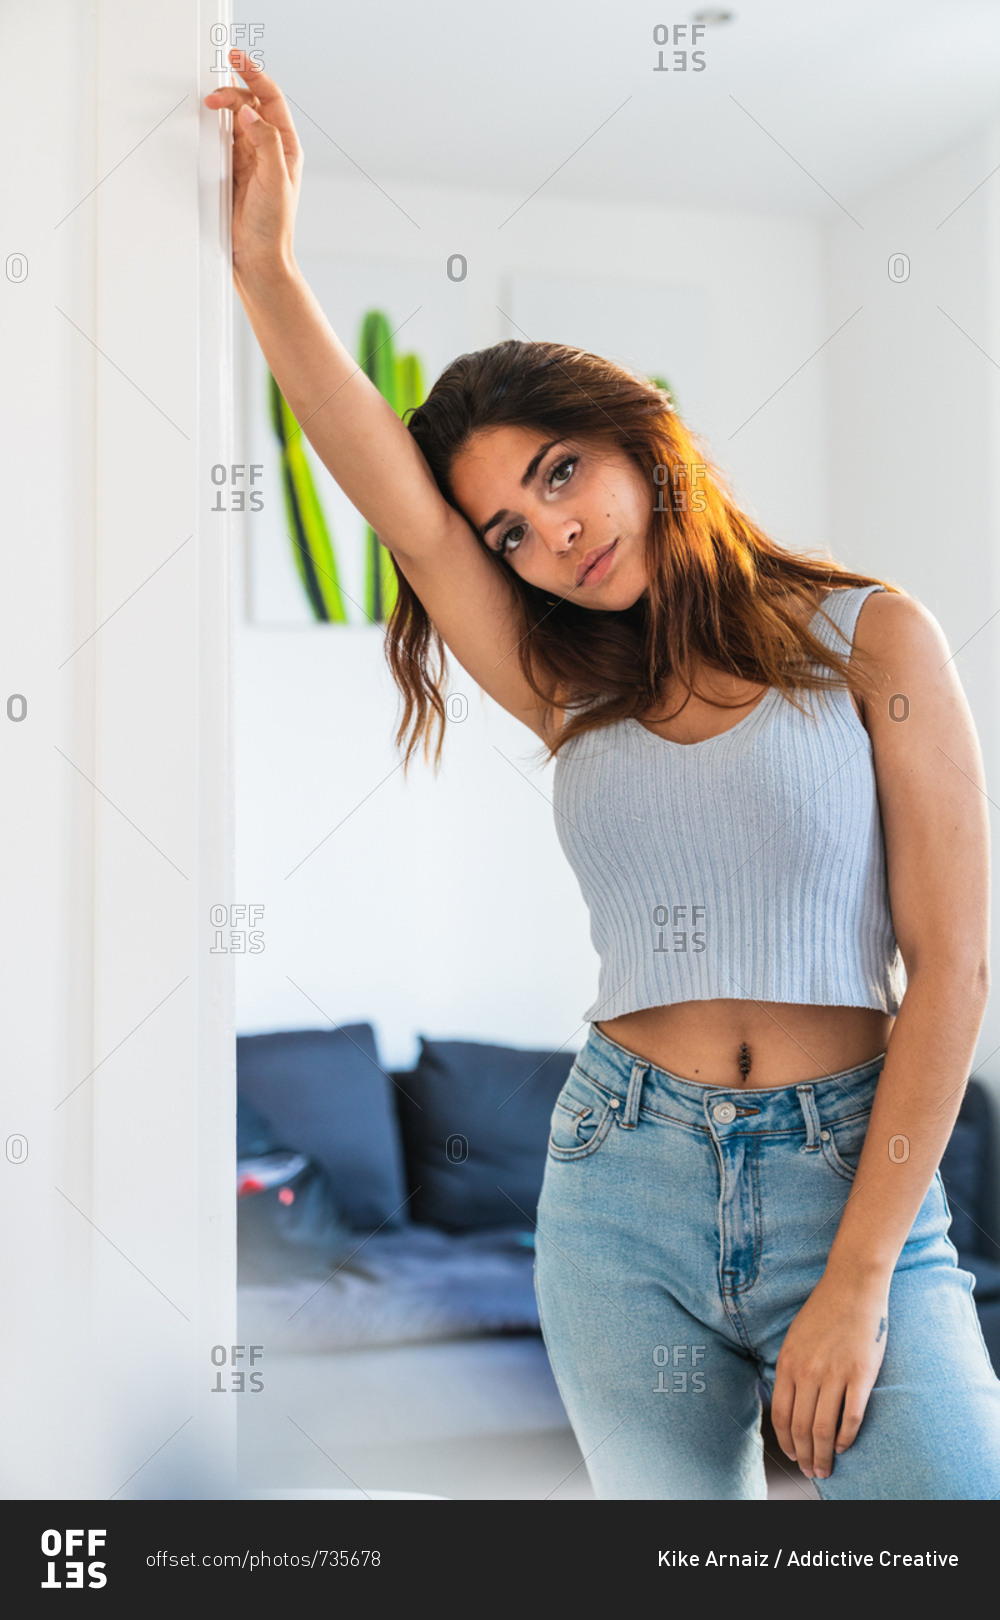 Slim beautiful woman standing at home stock photo - OFFSET